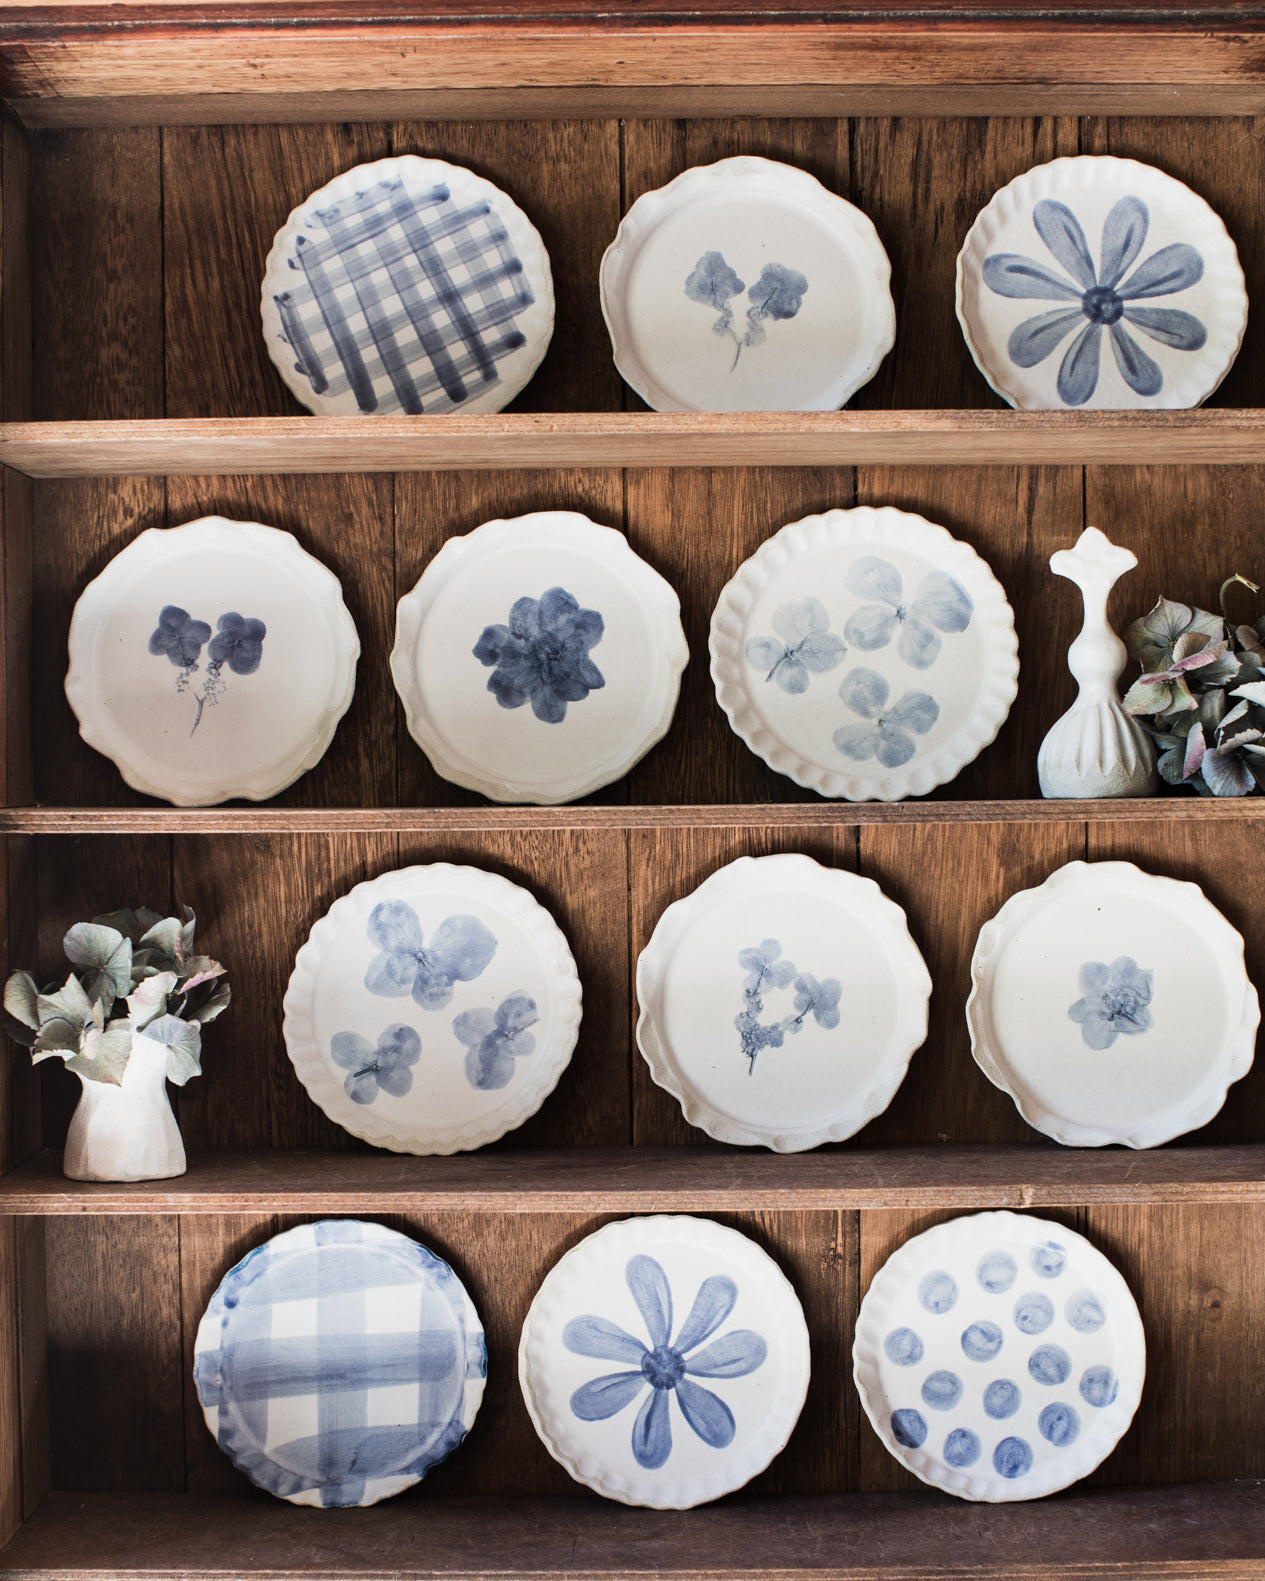 Handmade plates and little bowls in blue and white patterns by clay beehive ceramics